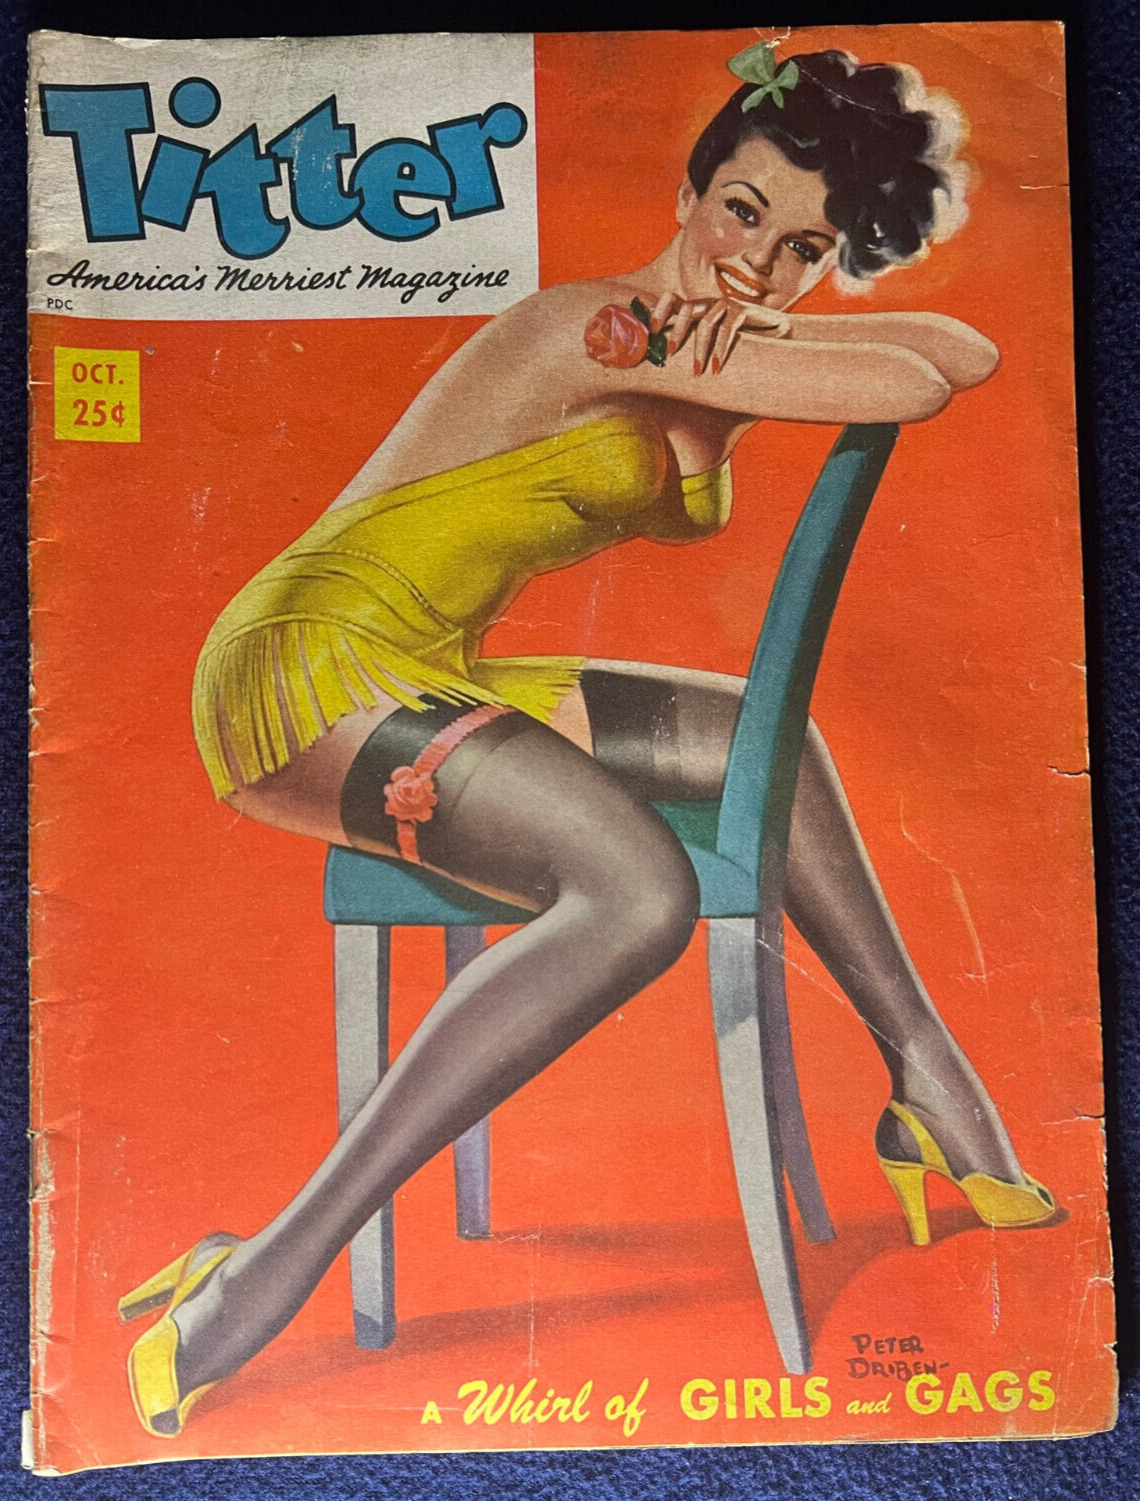 Titter October 1954 - Pinup Vintage Cheesecake COMBINE SHIPPING INV#085